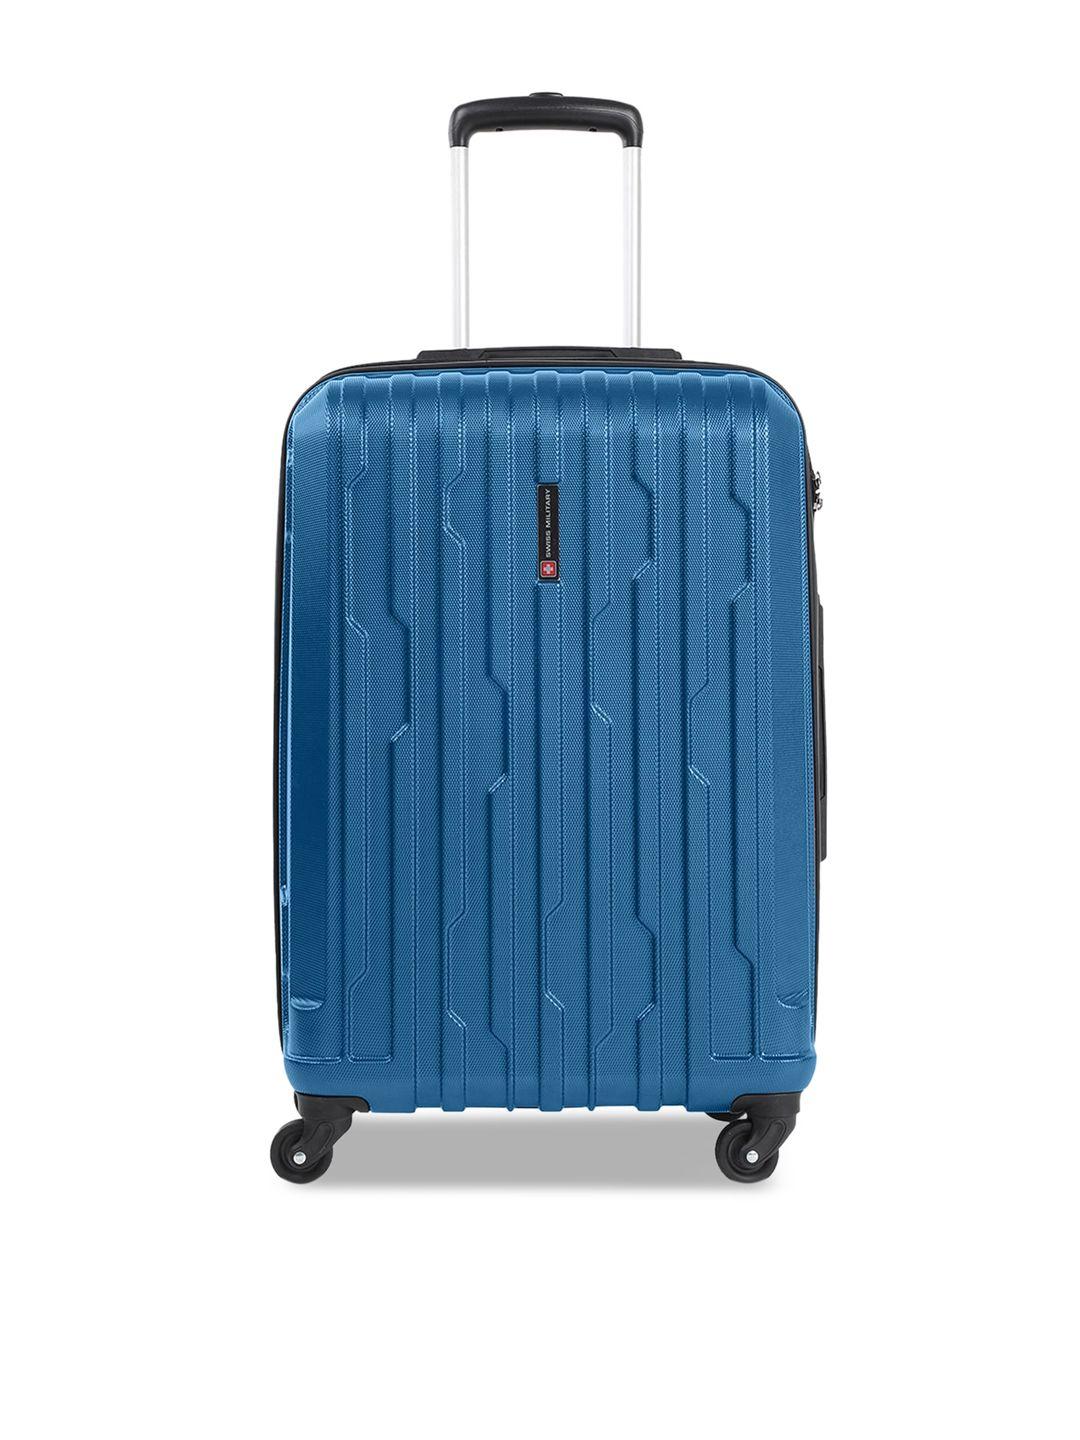 swiss military textured hard-sided cabin trolley suitcase